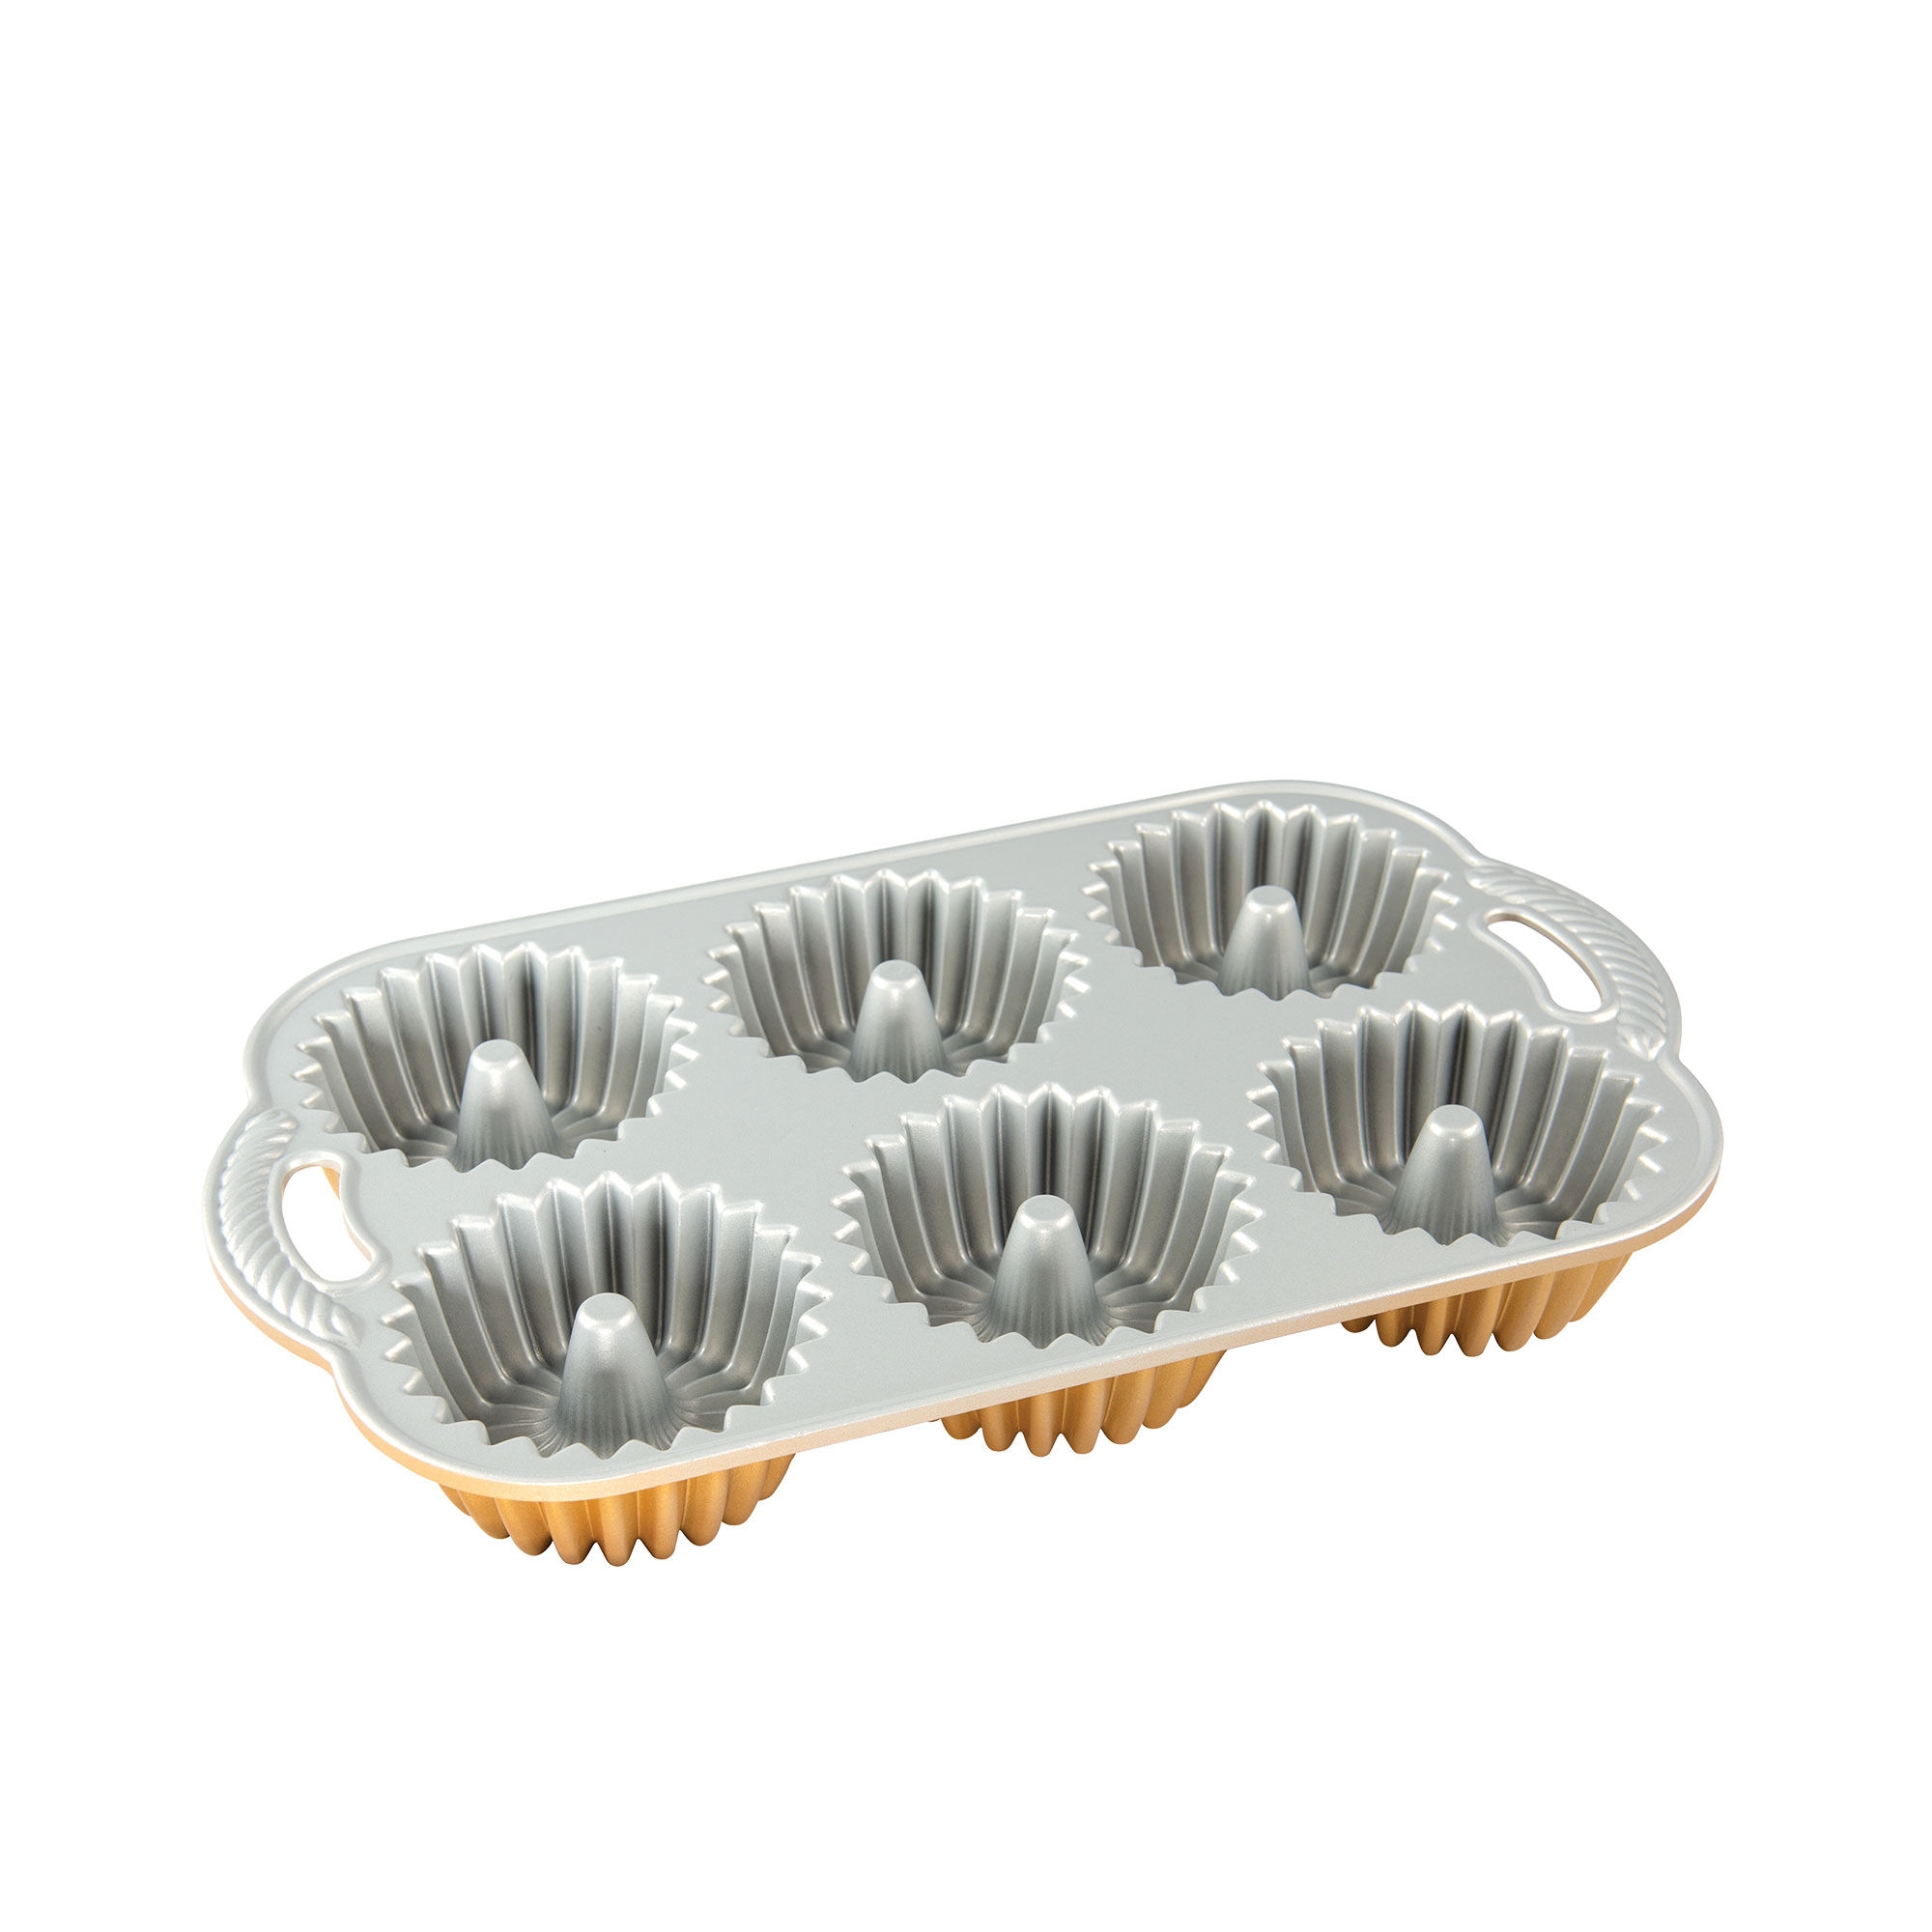 Nordic Ware Brilliance Bundtlette Muffin Pan 6 Cup Gold Image 1